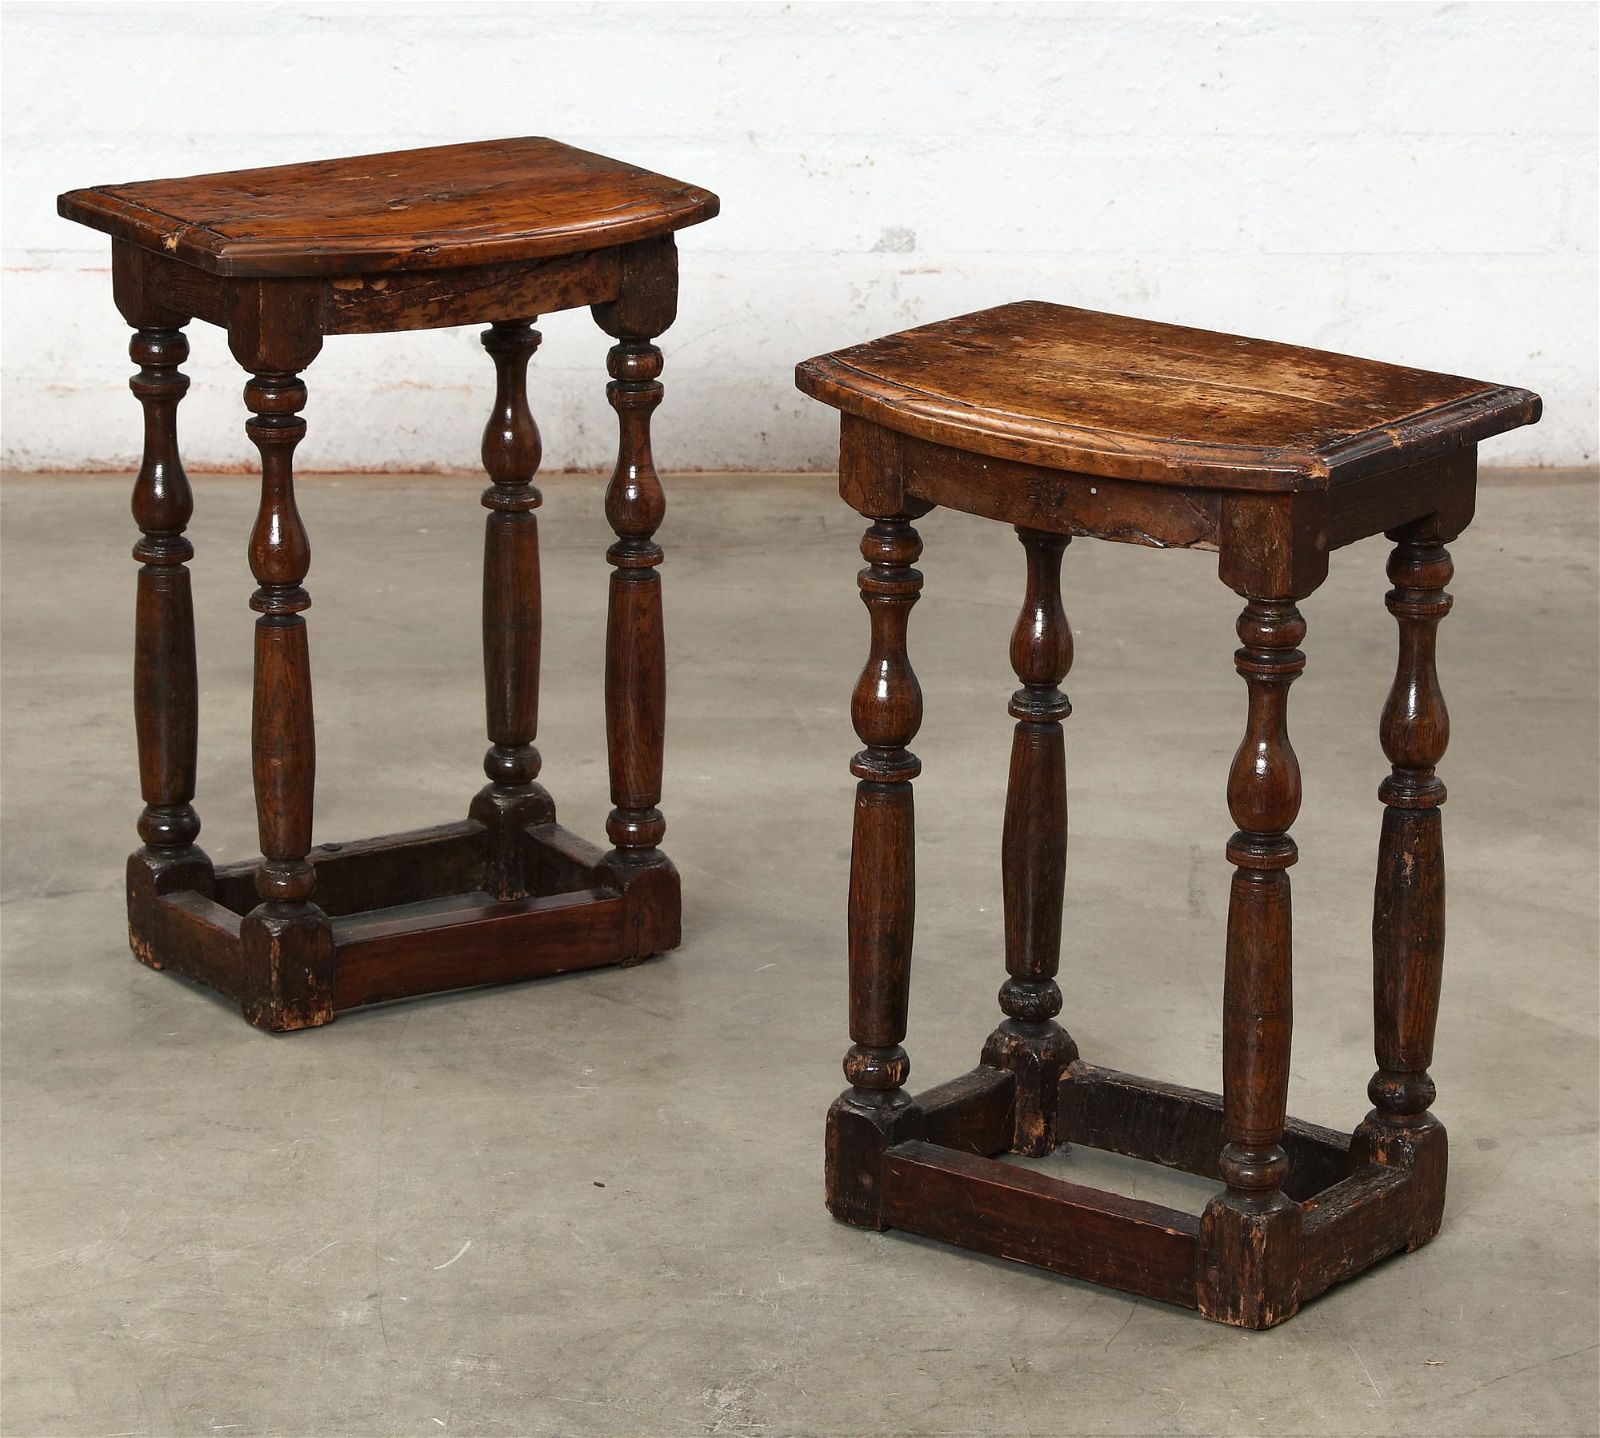 PAIR OF CONTINENTAL OAK AND FRUITWOOD